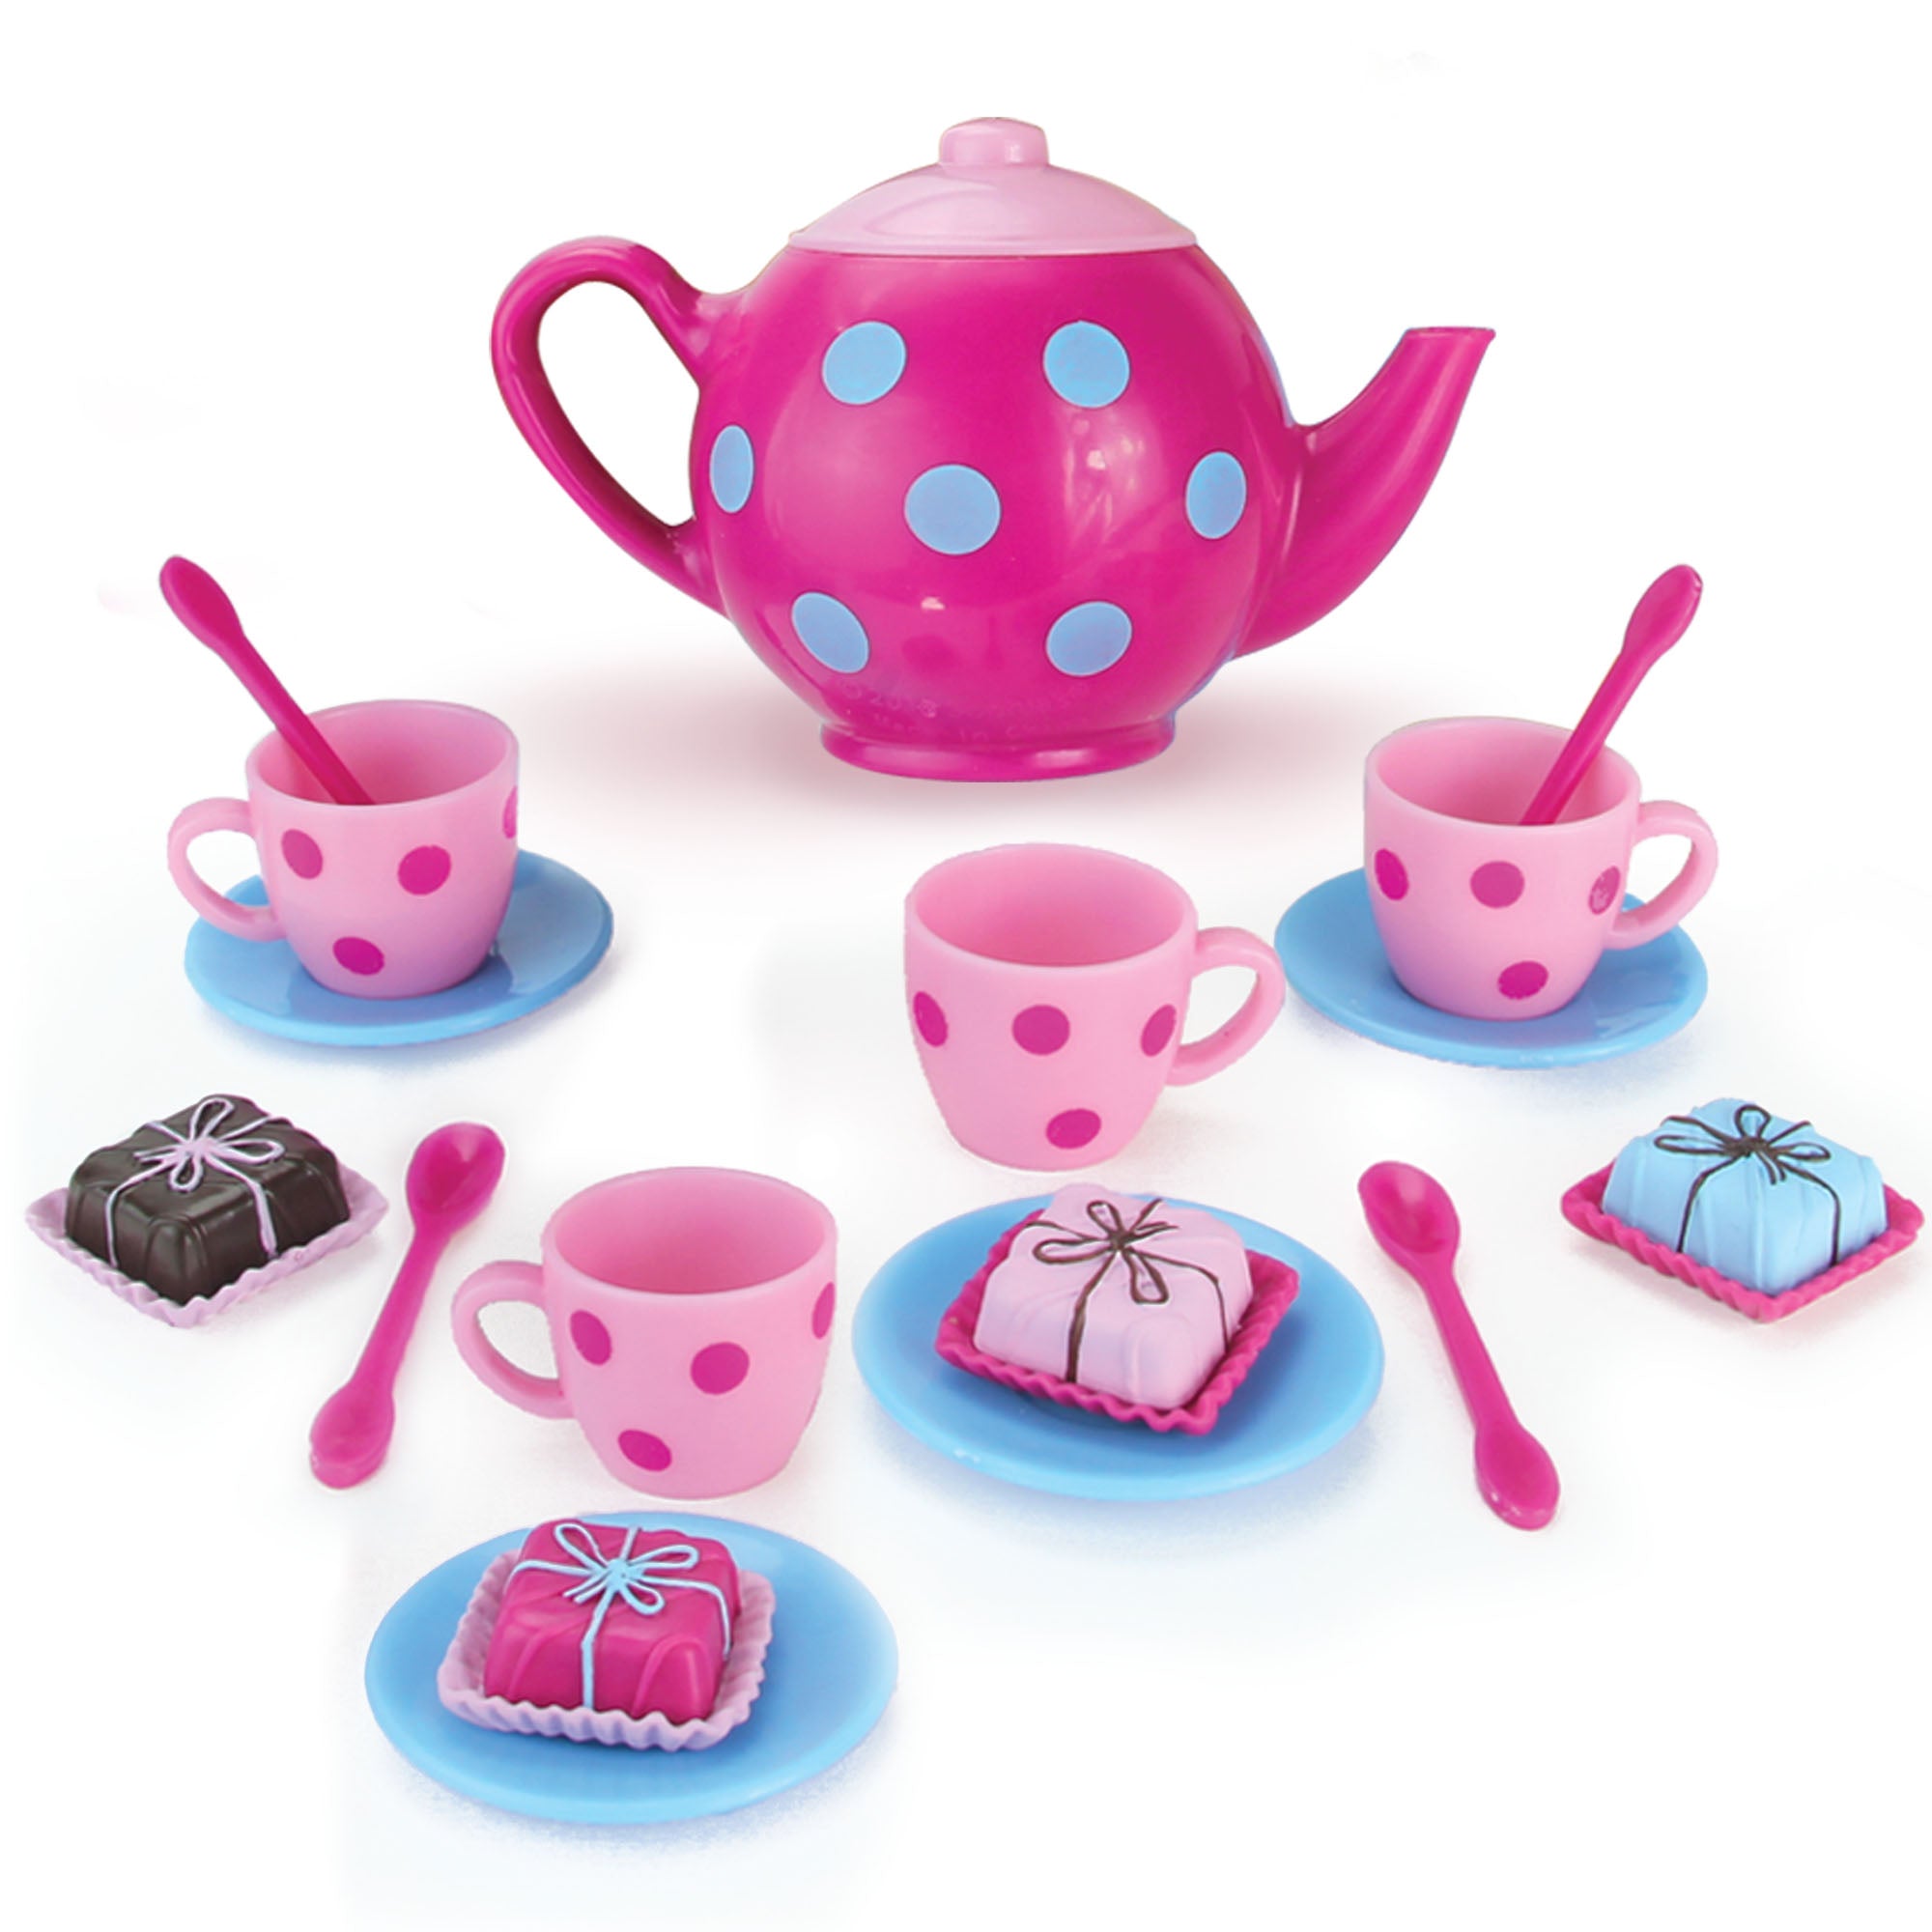 Sophia's Cupcakes, Petit Four Cakes and Tea Set for Four 18" Dolls, Pink